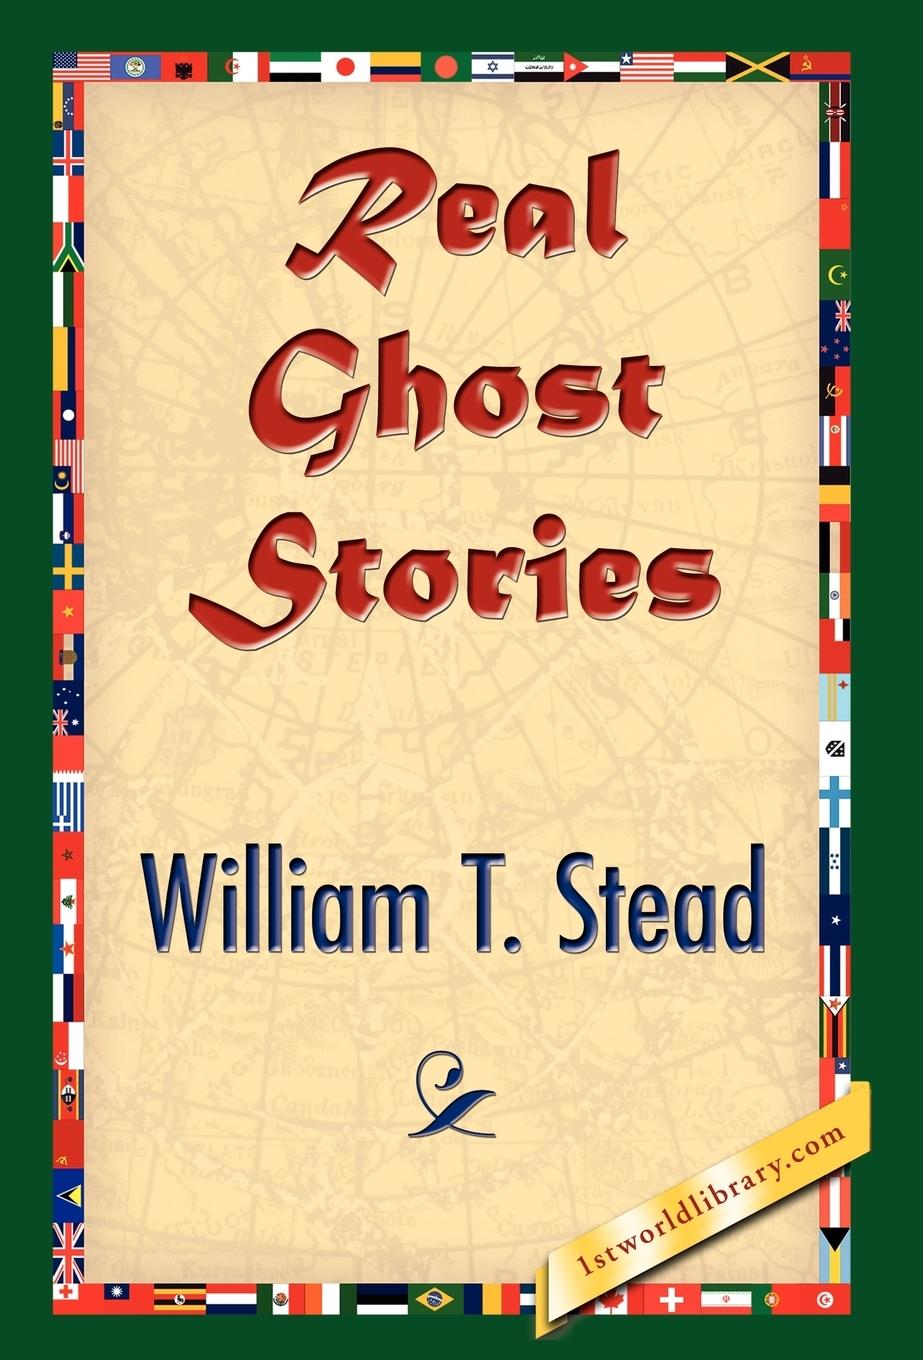 Real Ghost Stories - Stead, William Thomas